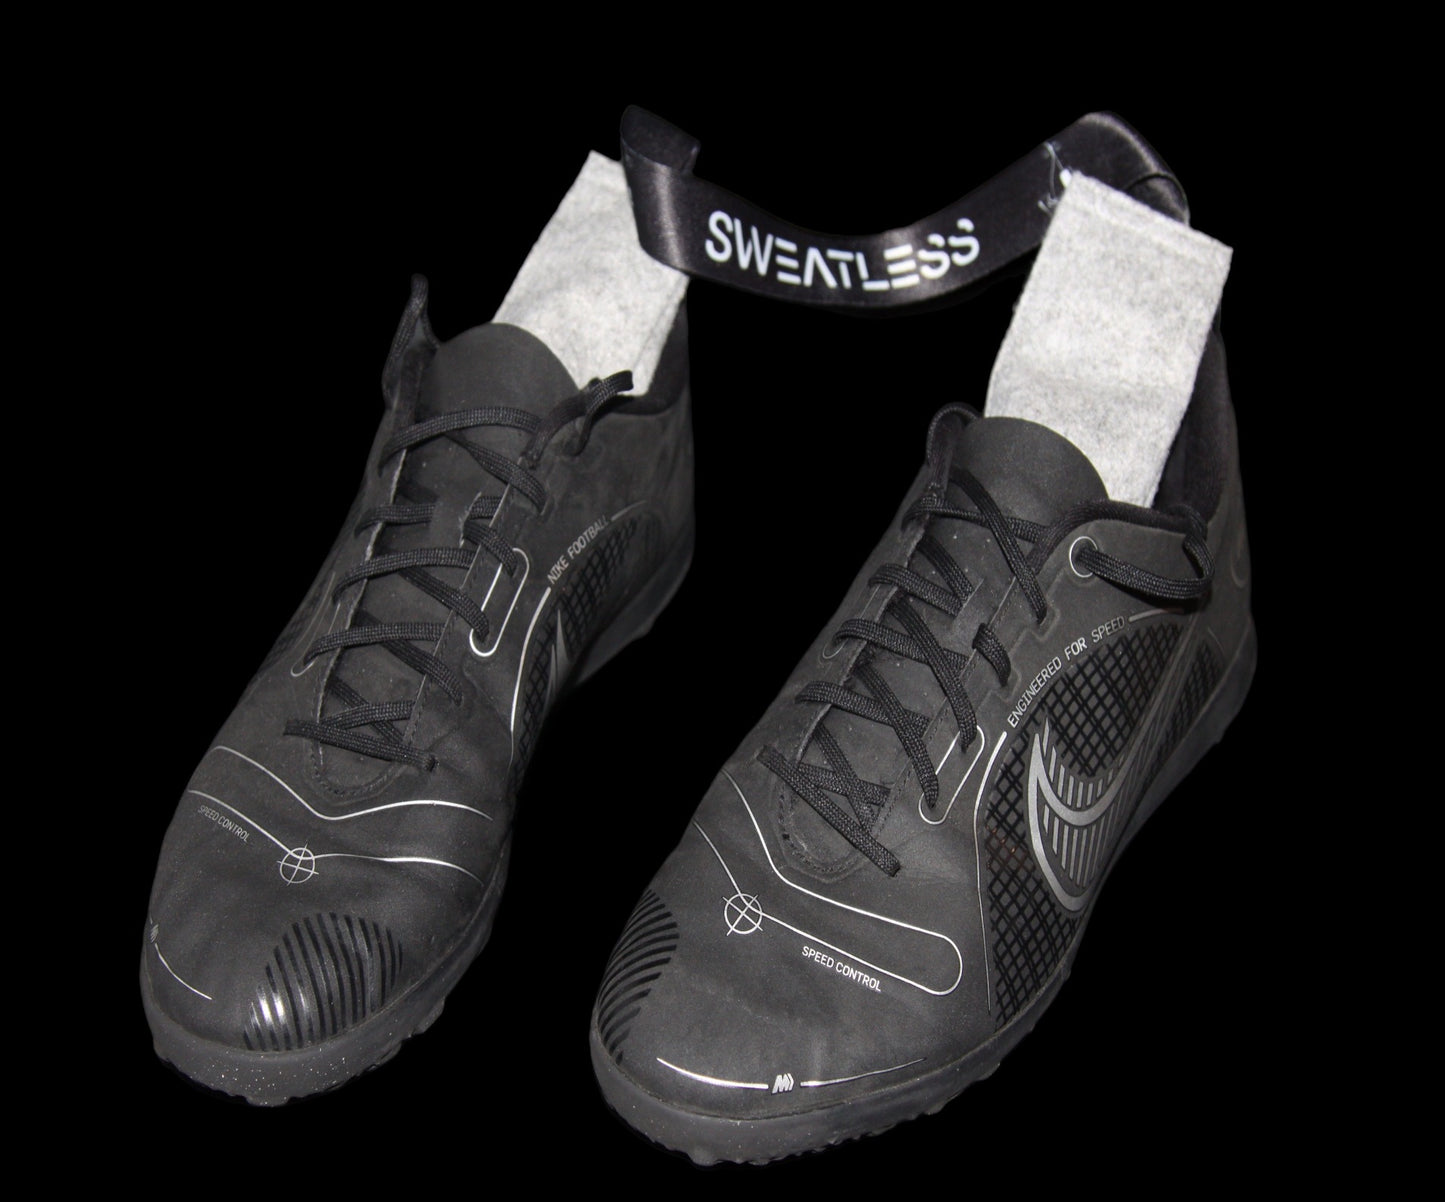 The Sweatless Glove and Shoe Deodorizer